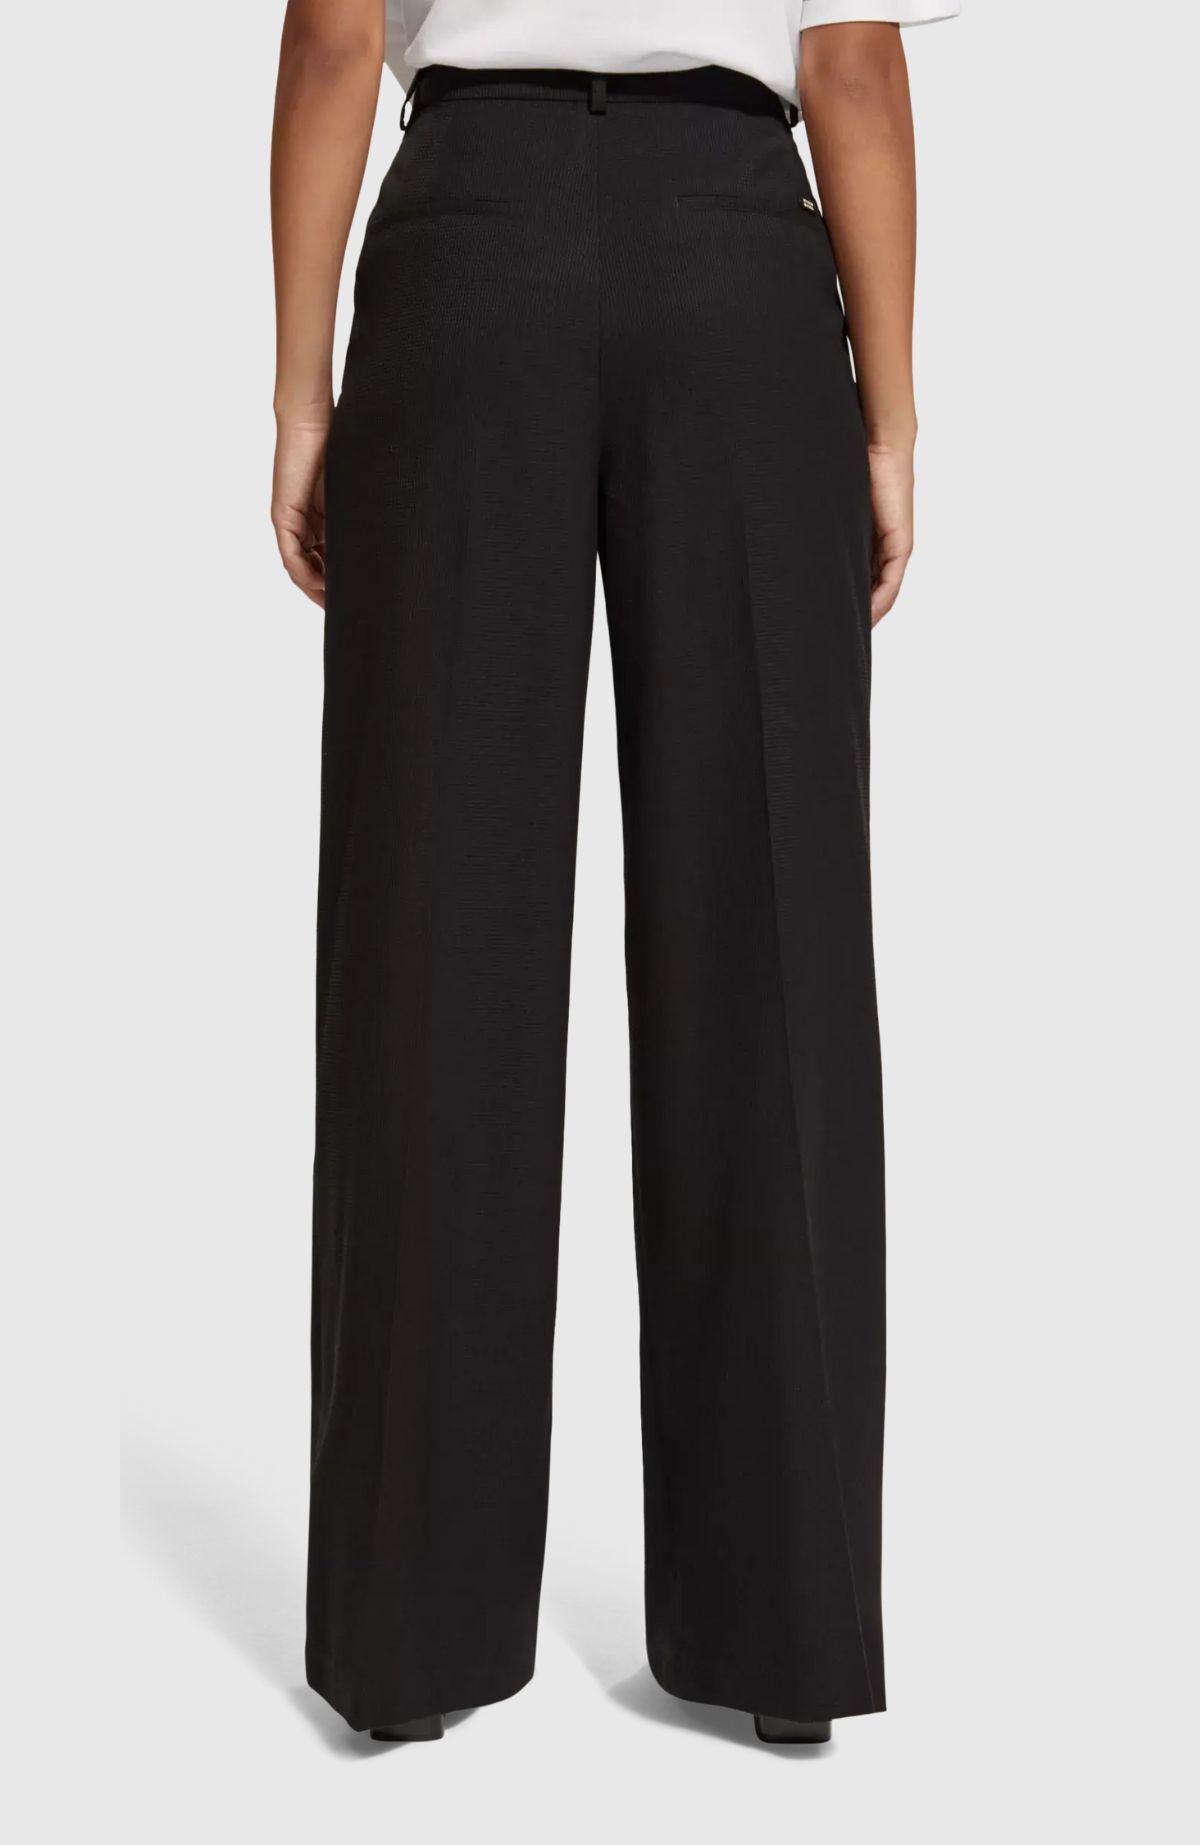 Rose – pleated high rise wide leg pant